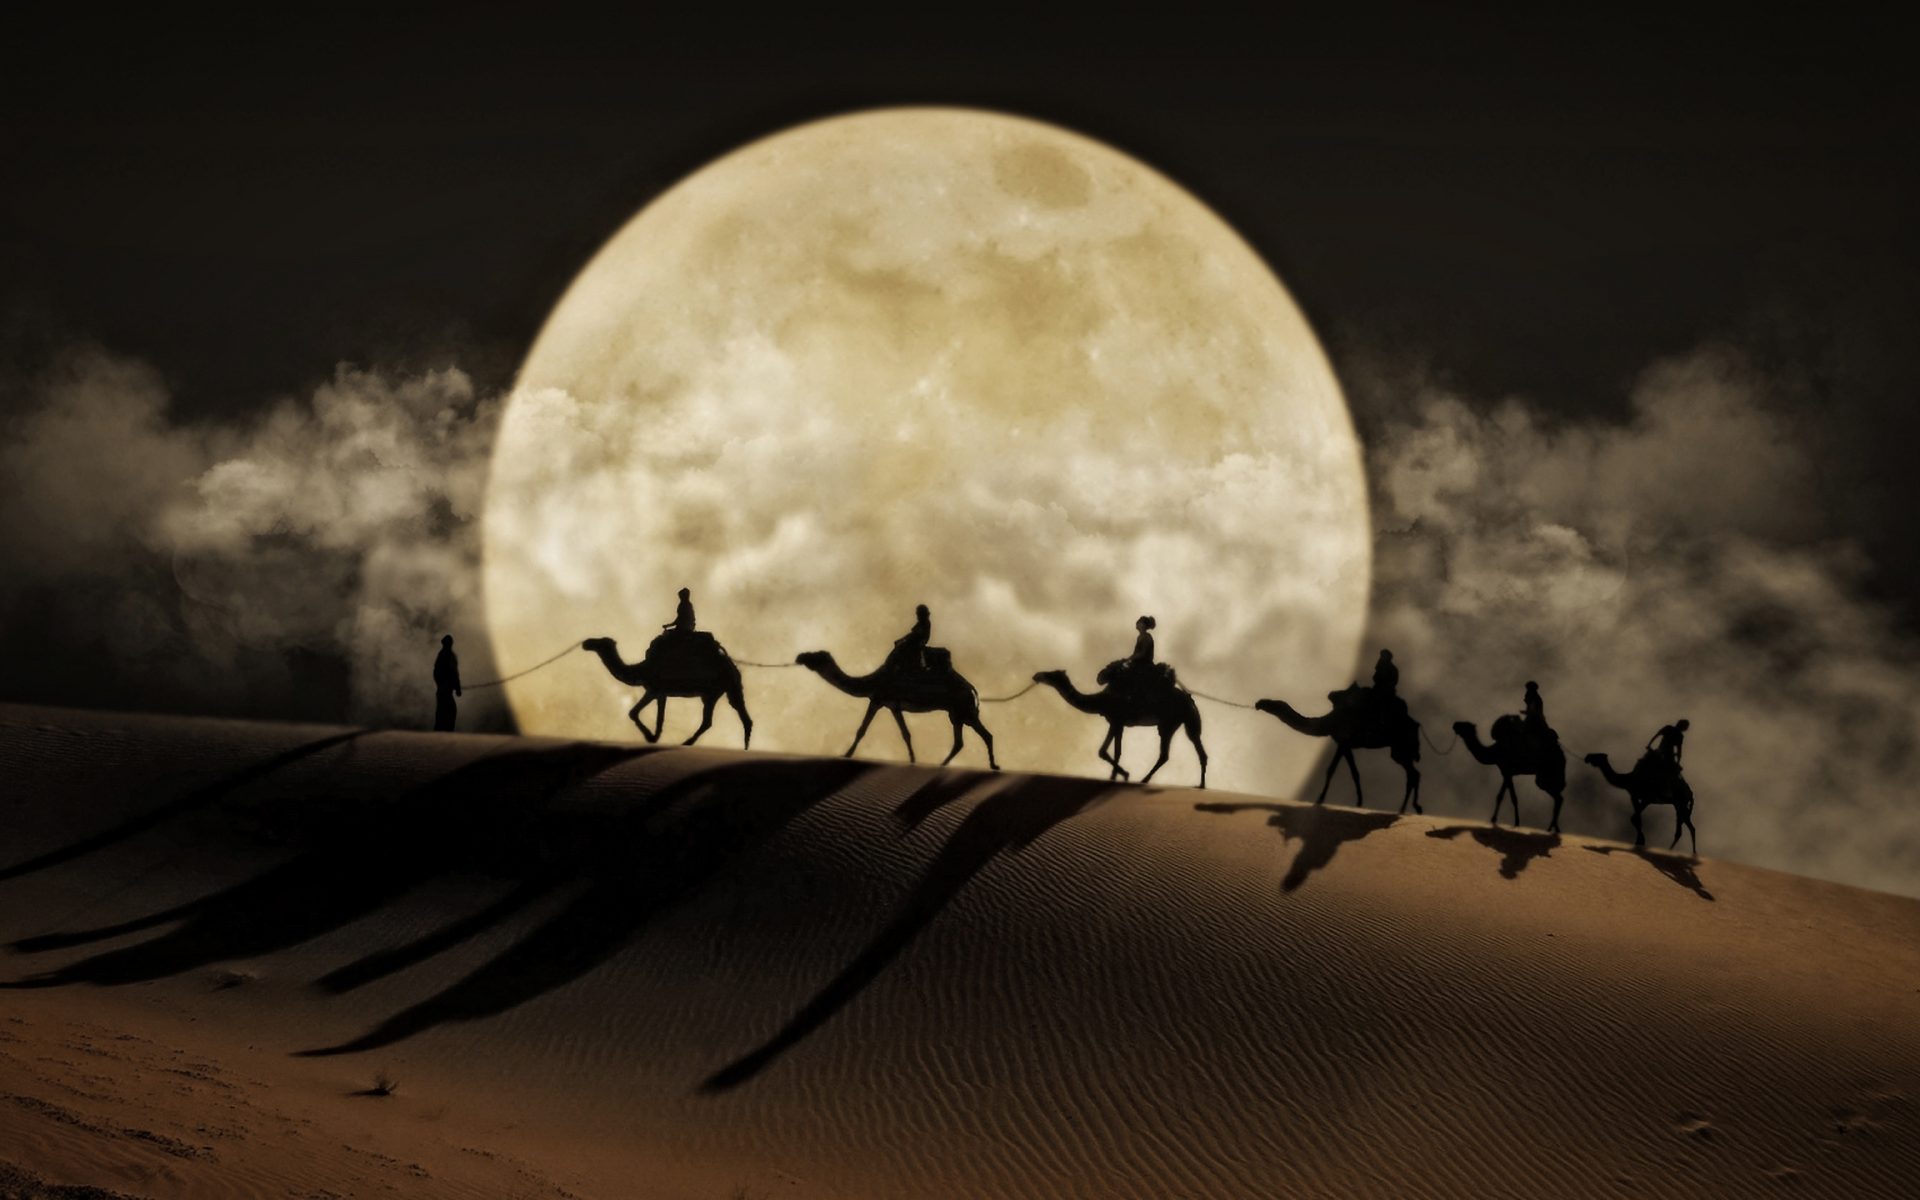 Camels Wallpapers